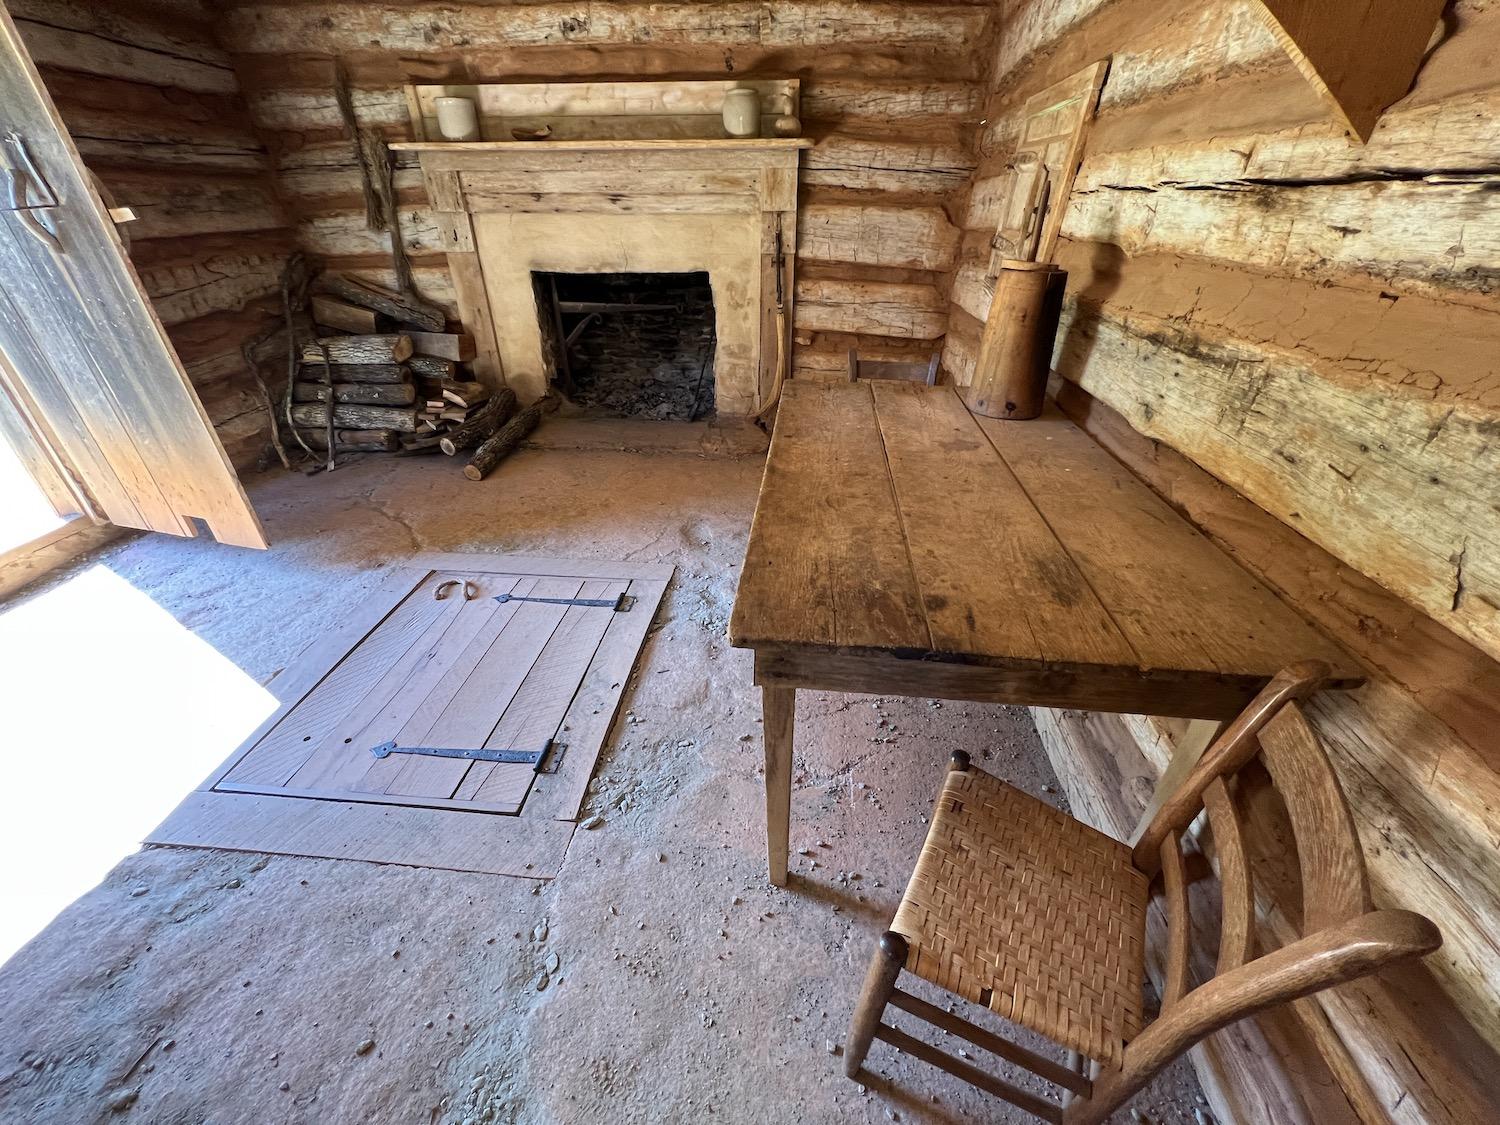 Inside a reconstruction of the kitchen cabin that Booker T. Washington lived in for his first nine years as an enslaved person.